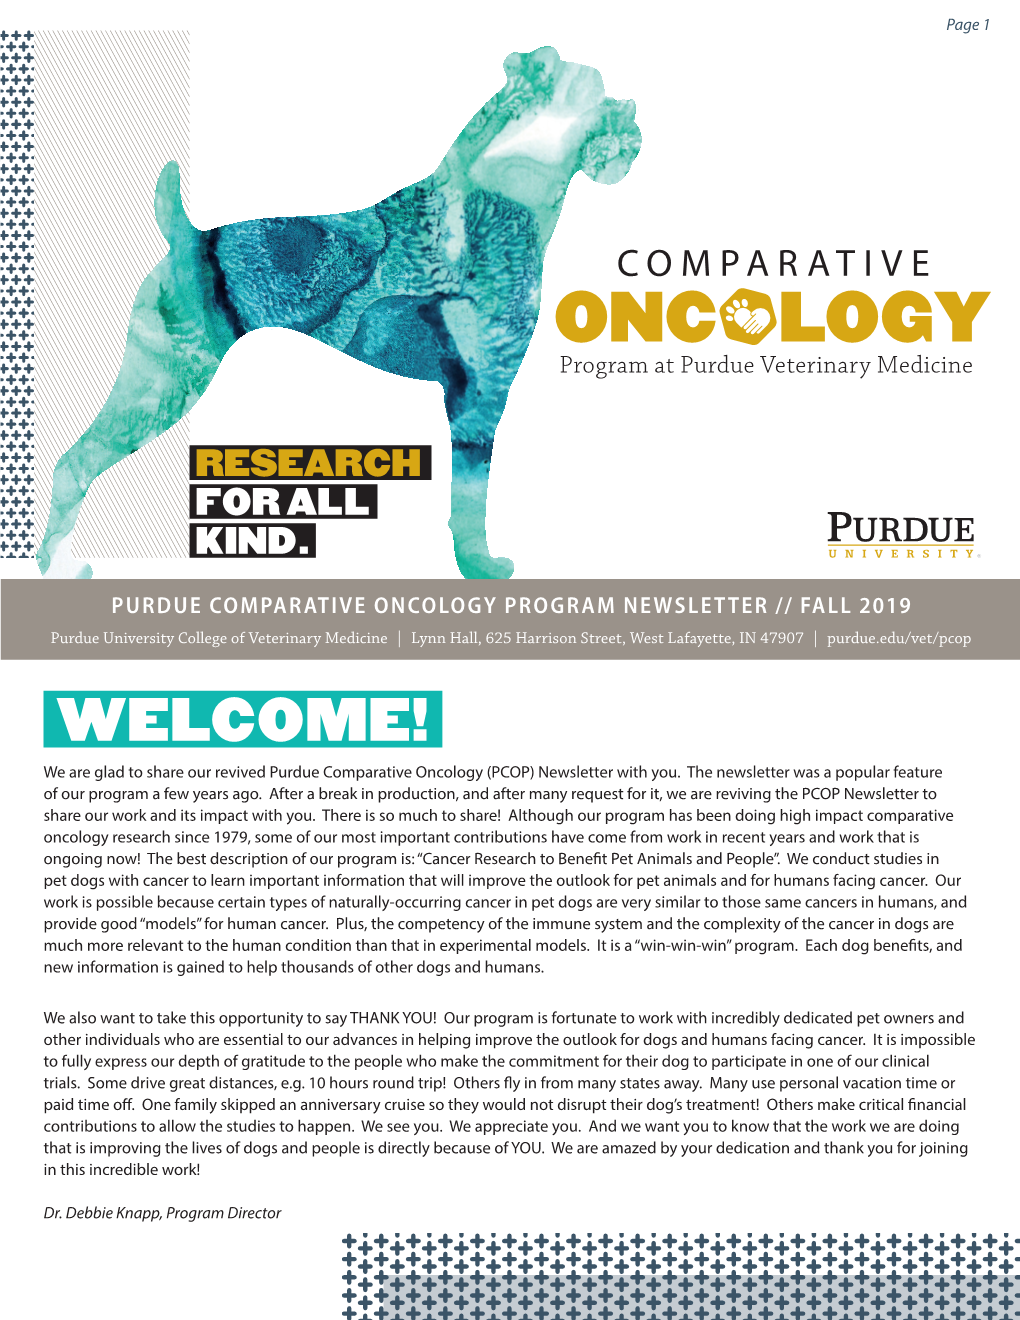 Purdue Comparative Oncology Program Newsletter